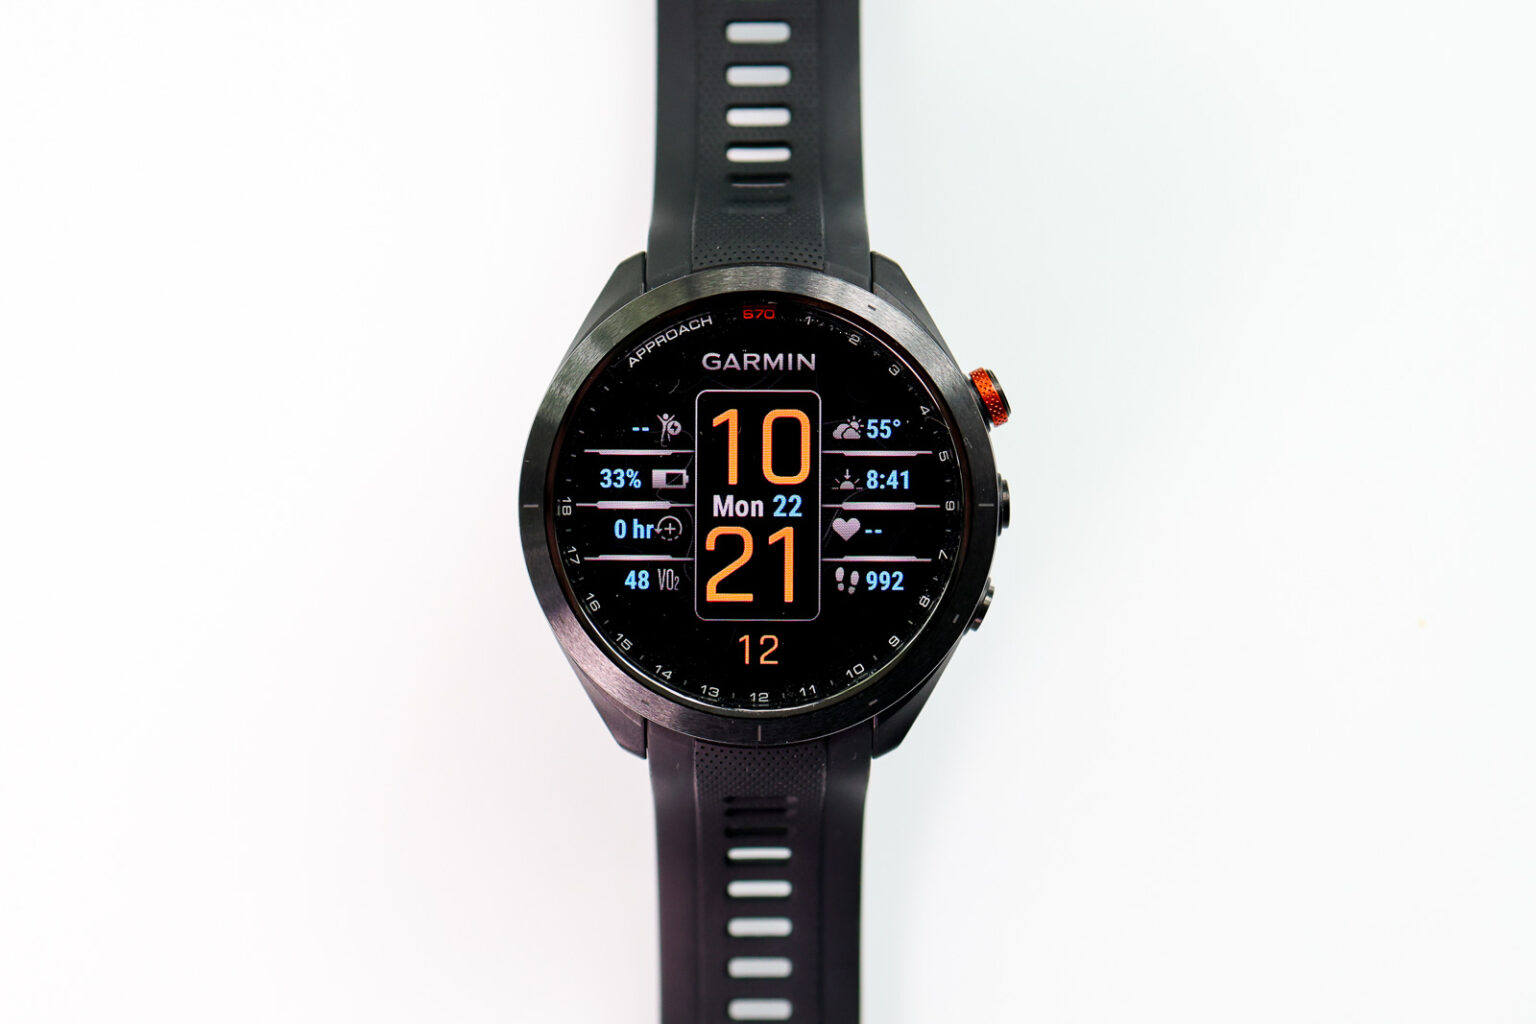 Save $200 on the top-end Garmin Epix 2 running watch at .